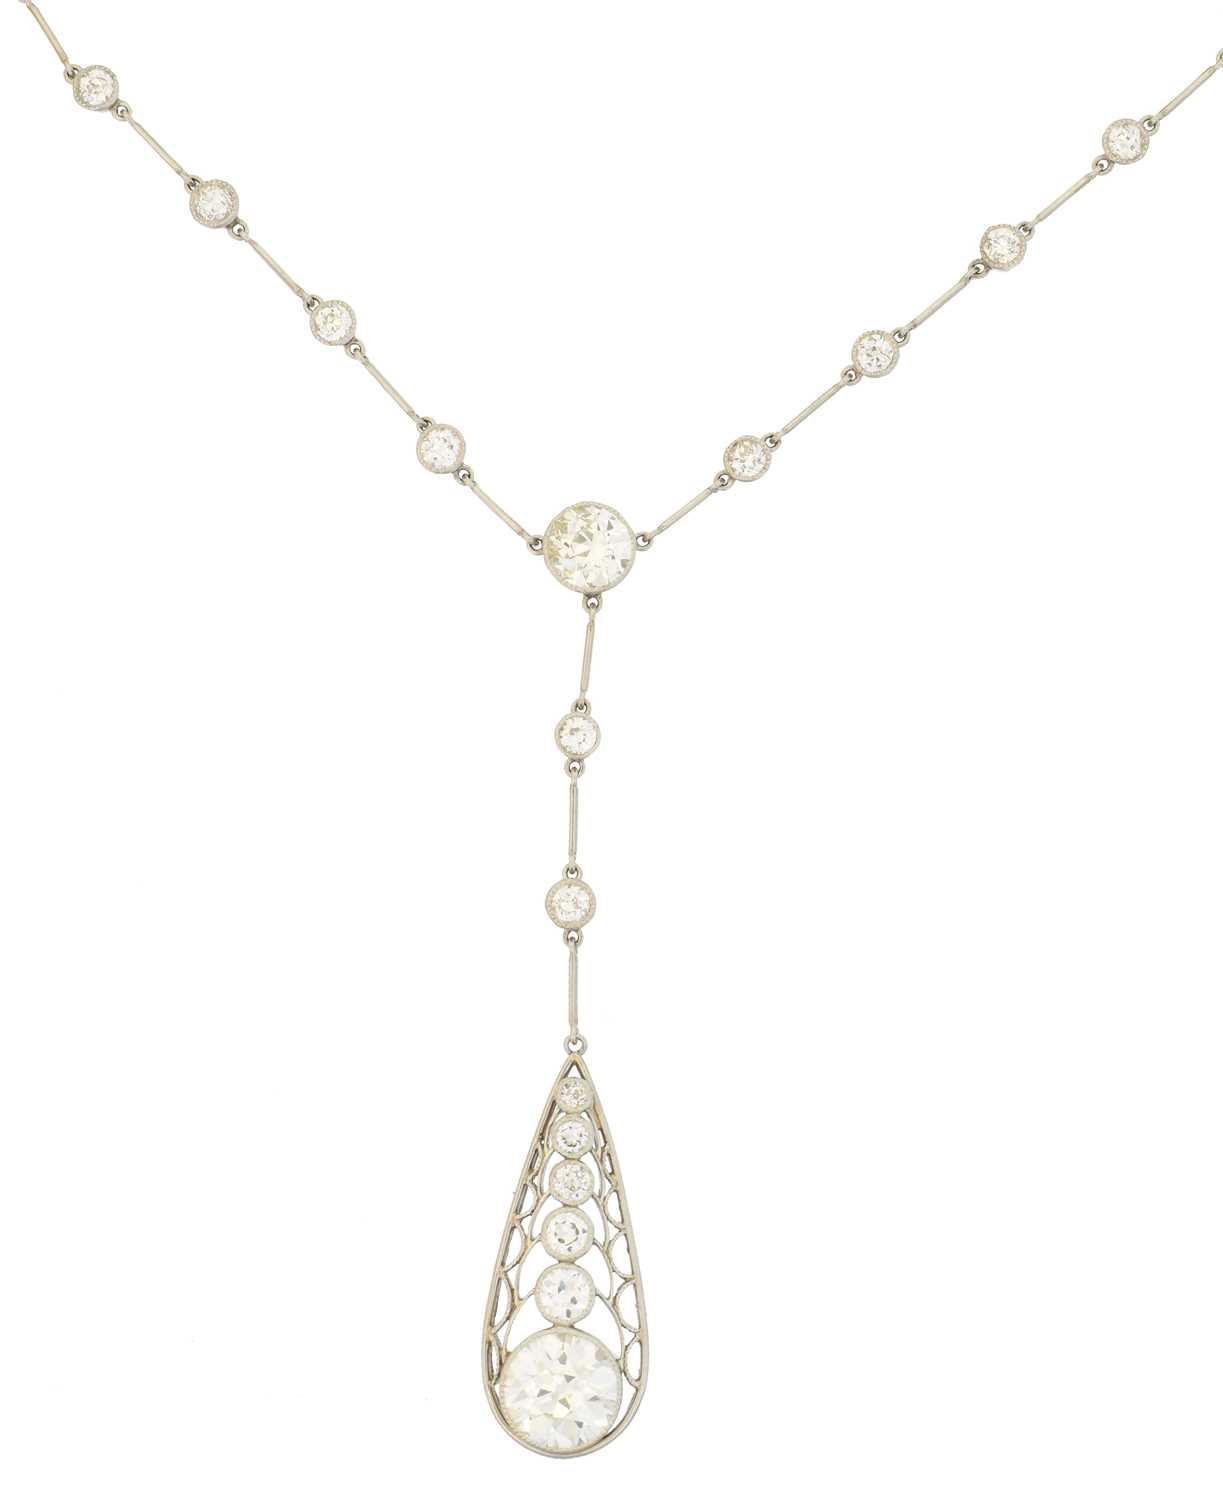 Lot An early 20th century diamond necklace